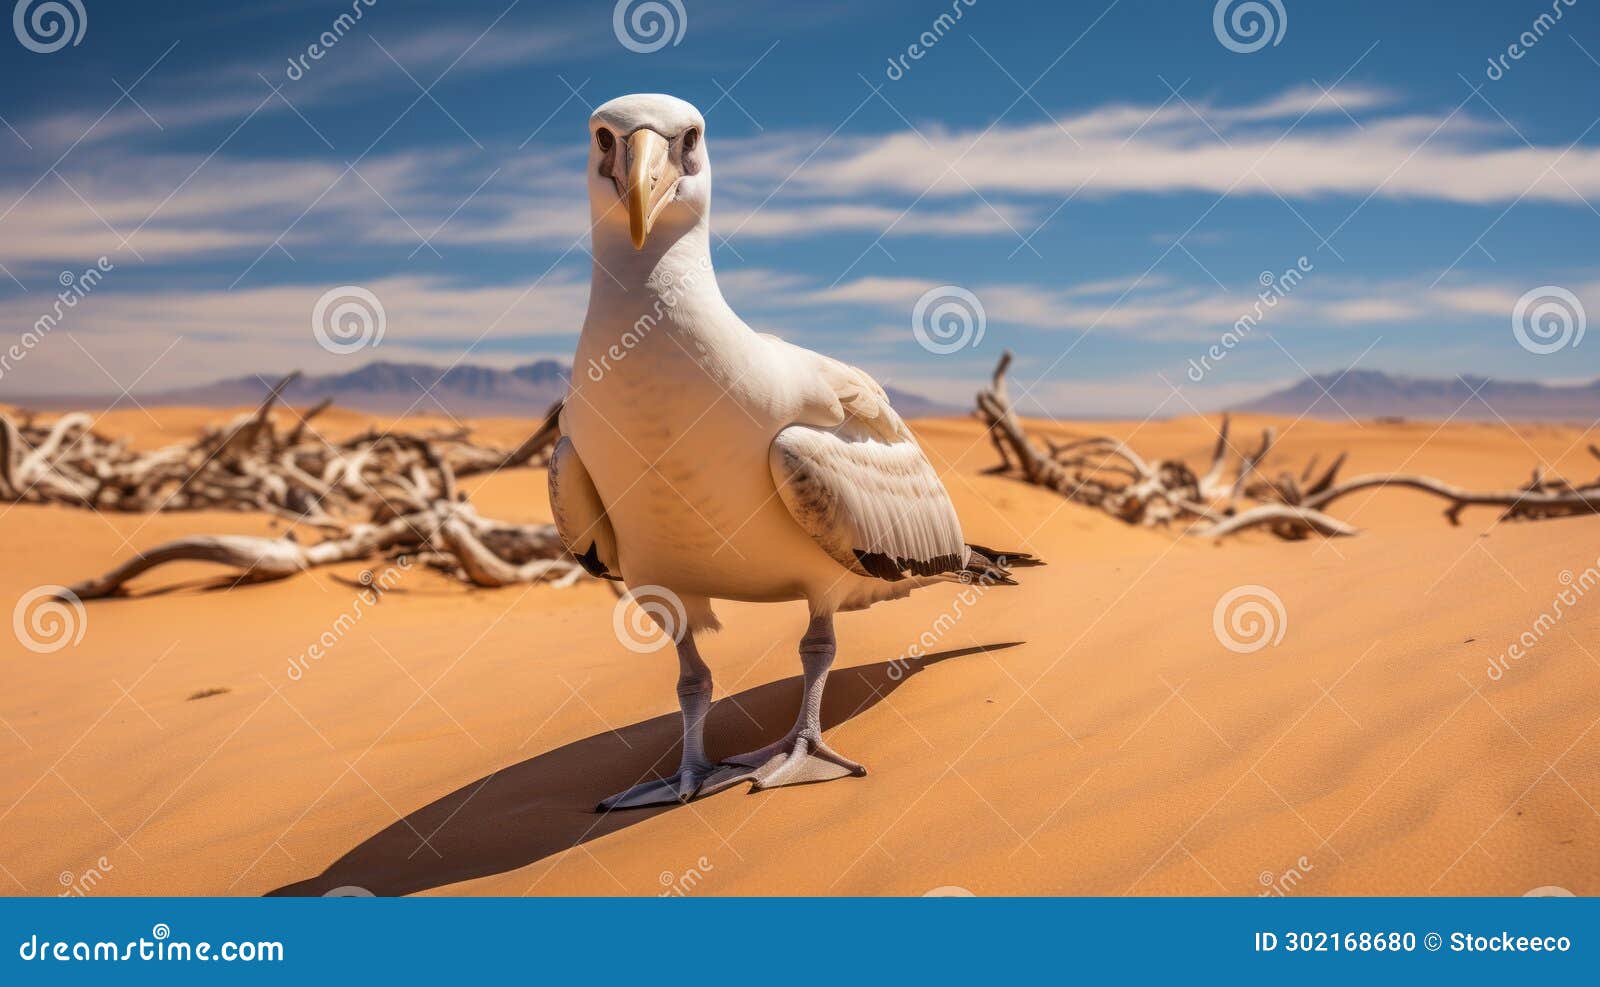 quirky bird in pop culture style standing in desert sand